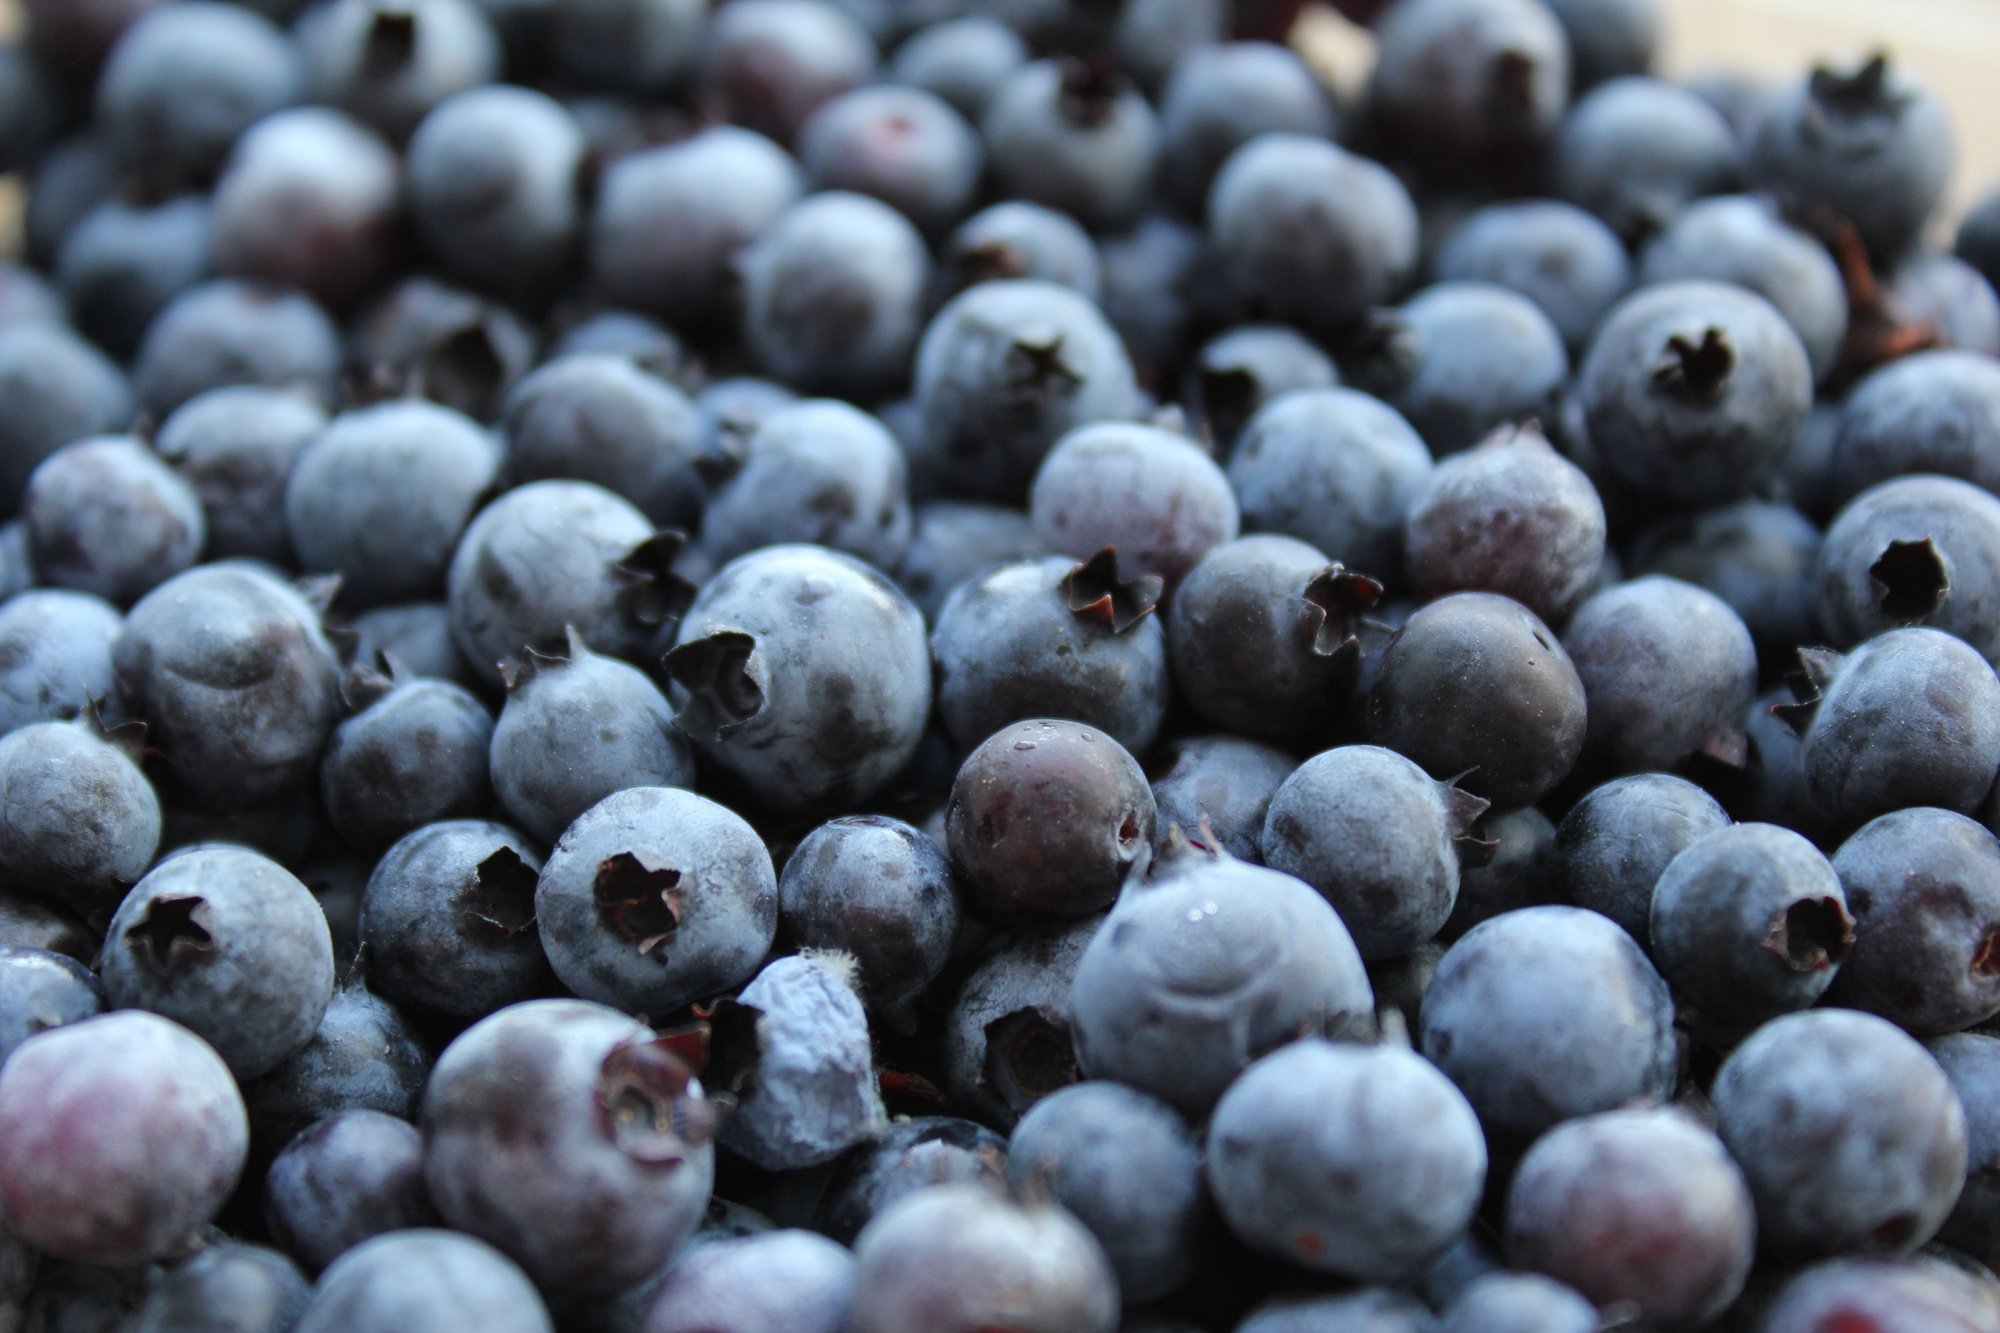 an image from the blogpost Maine Wild Blueberries - They don't call them wild for nothing